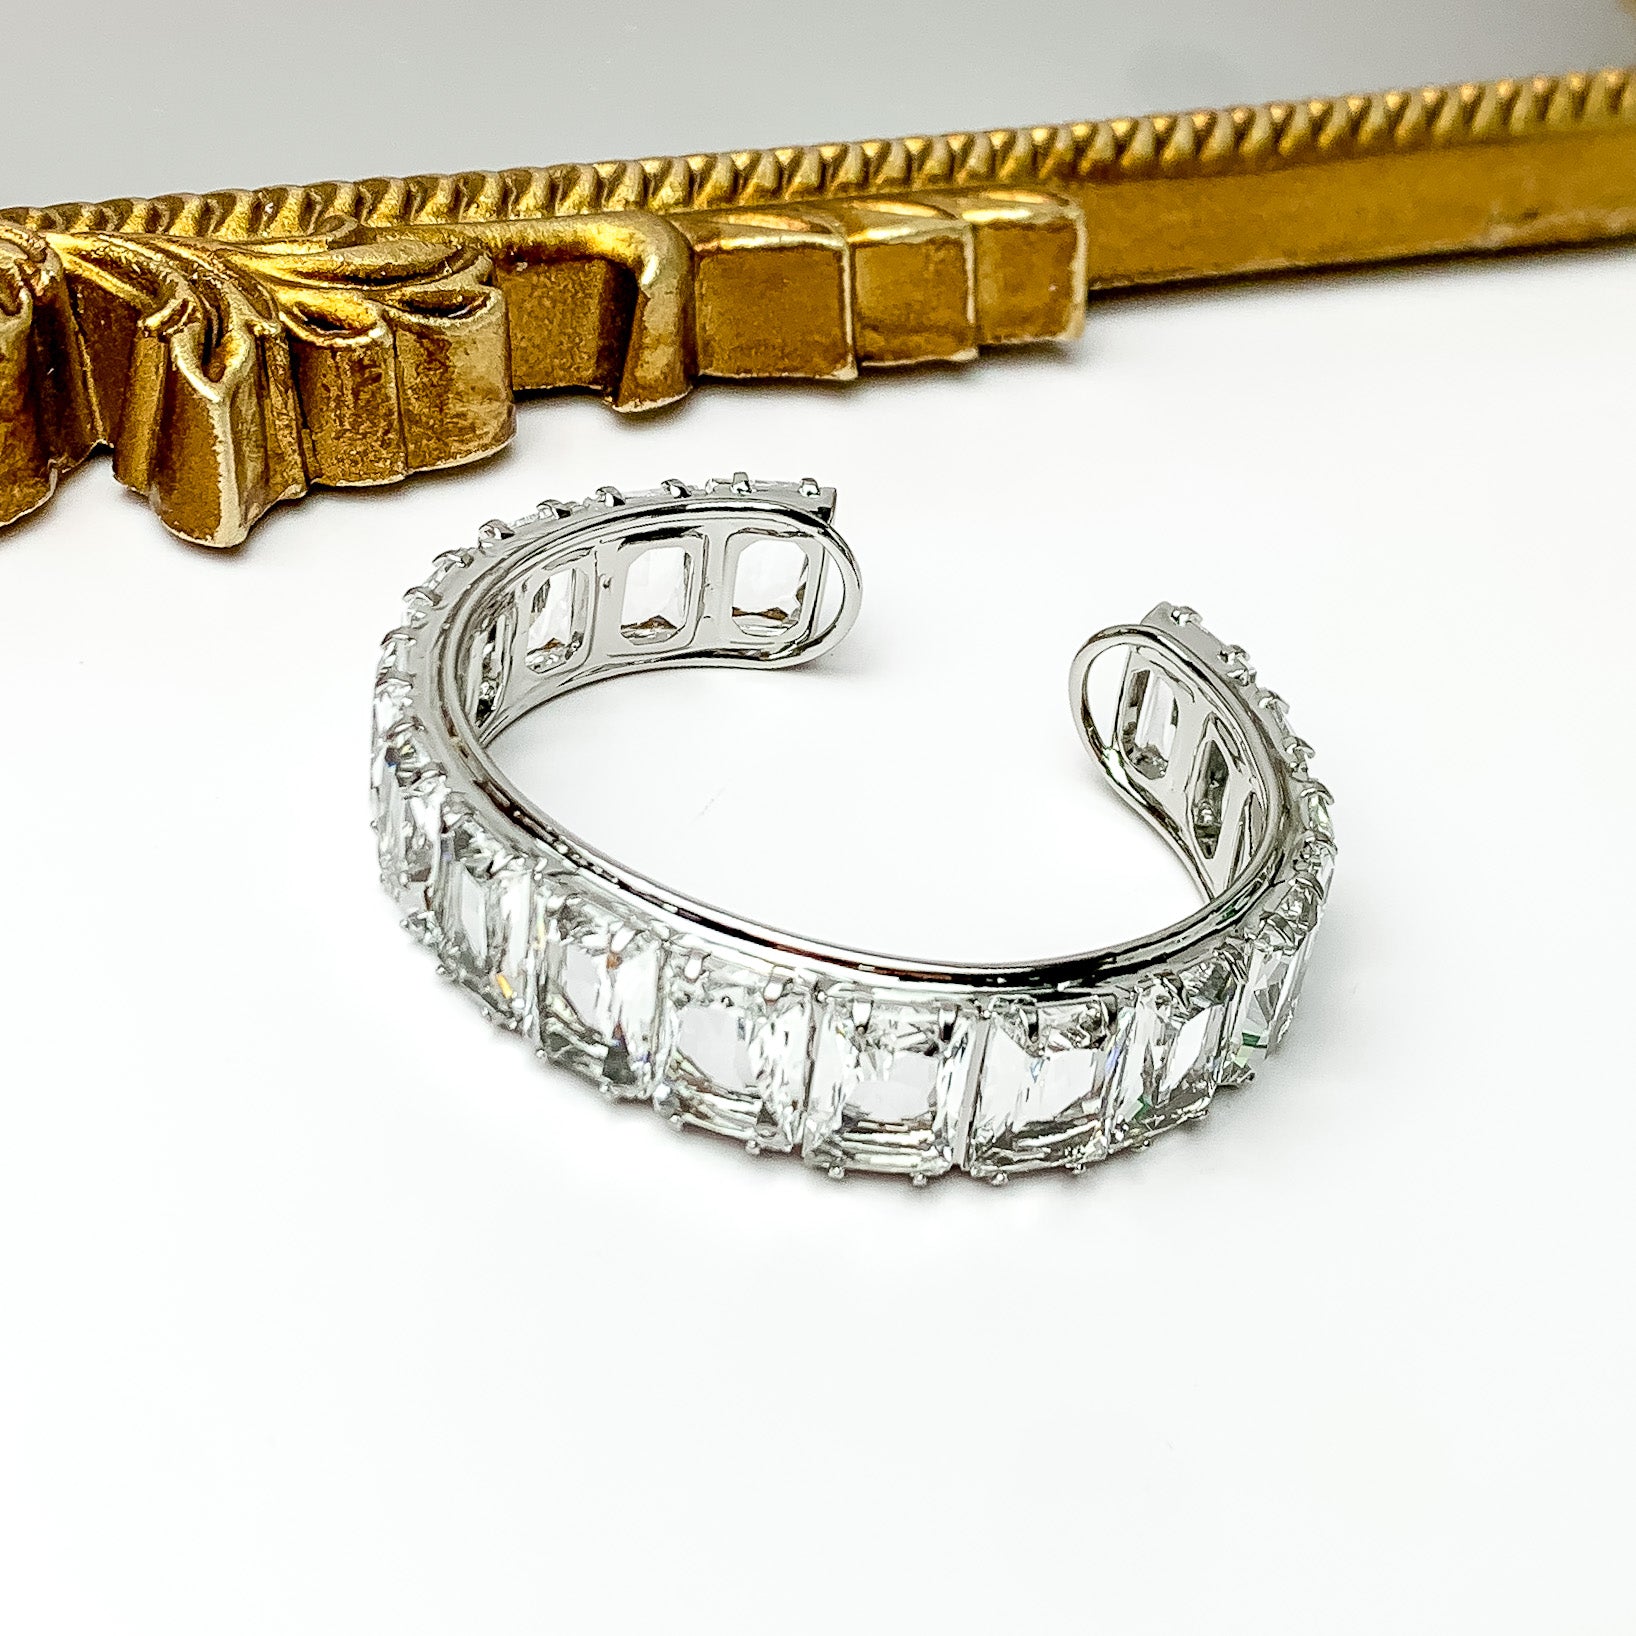 Silver bangle with a clear, rectangle crystal inlay. This bracelet is pictured on a white background with a gold mirror at the top of the picture.  